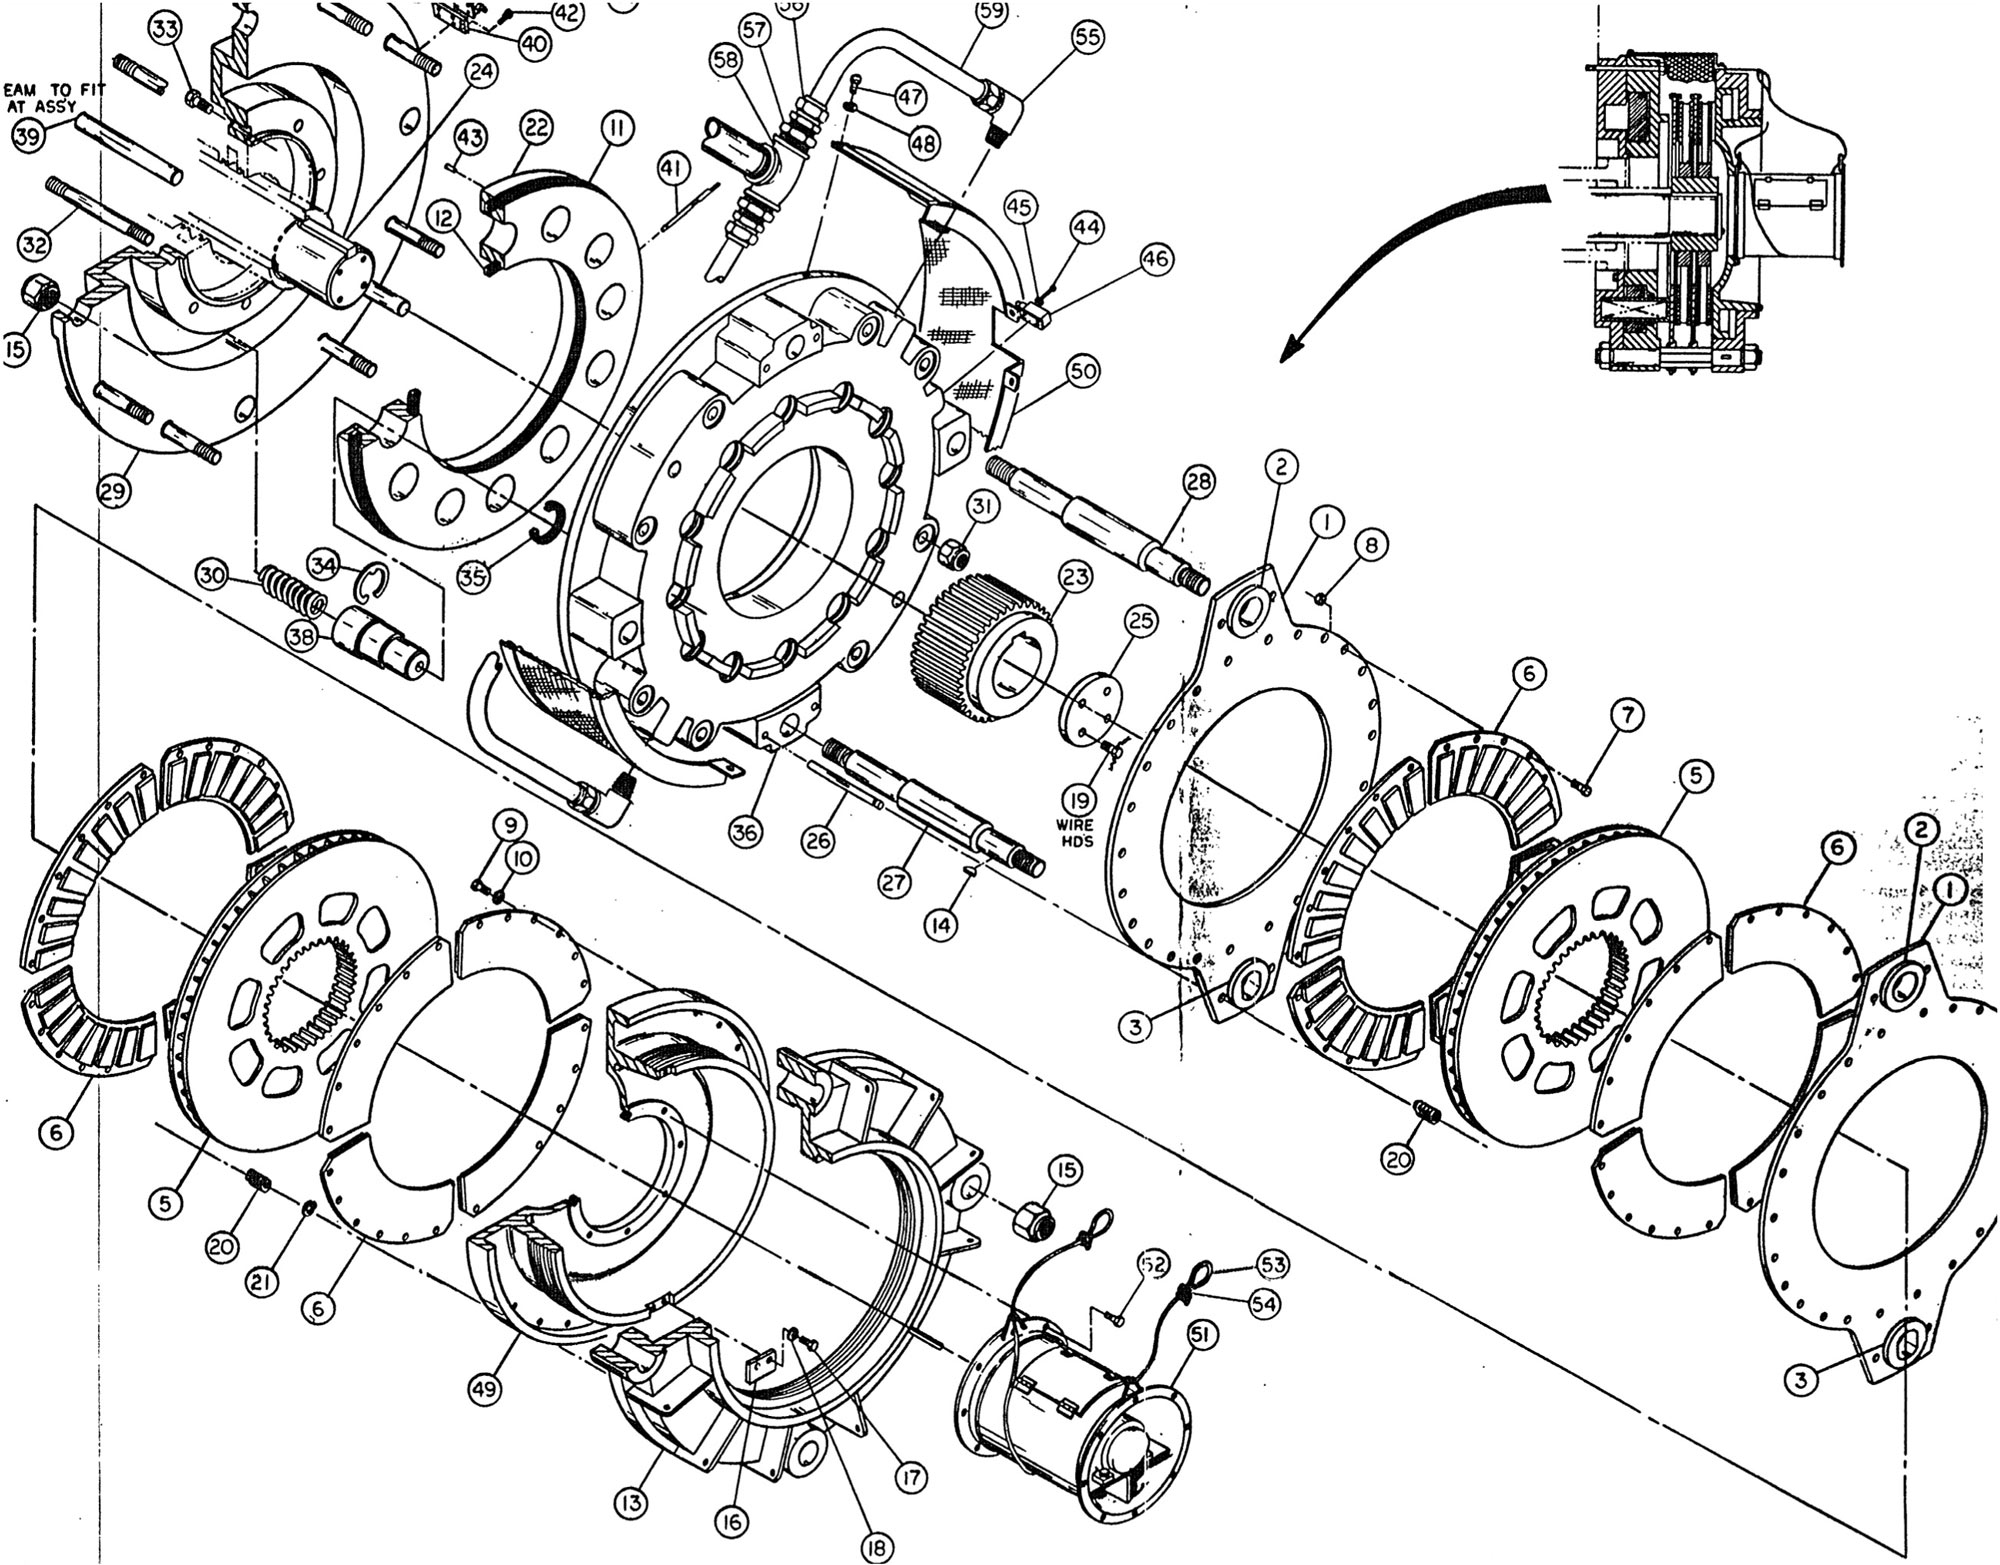 DK-Brake-Assembly-with-Blower